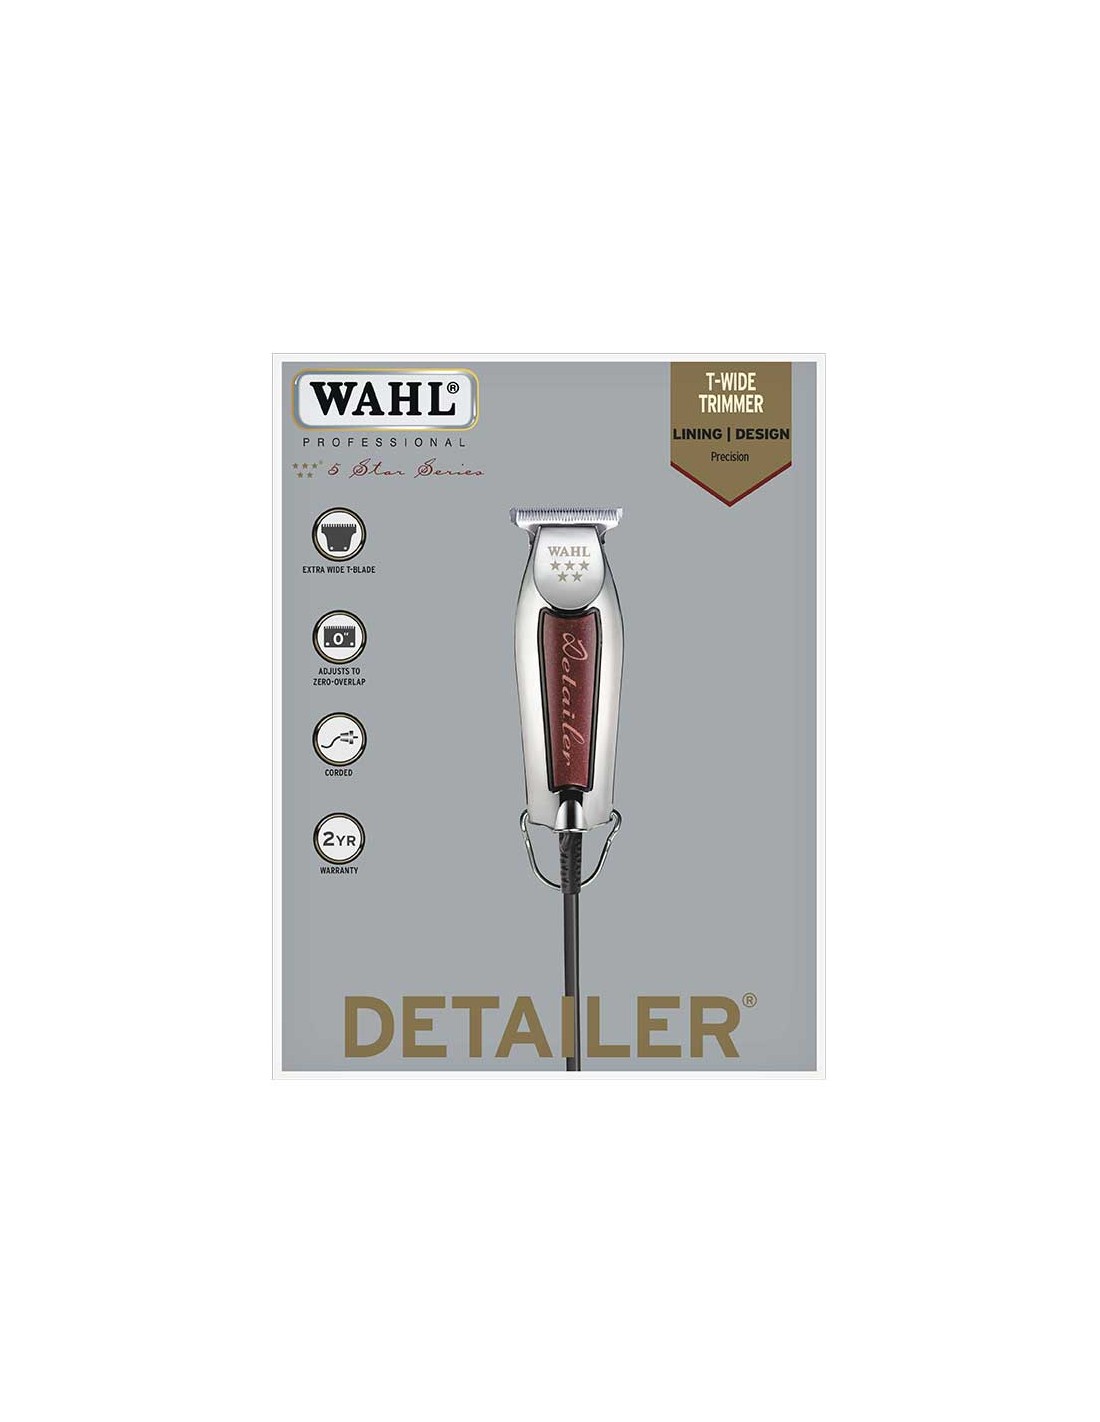 Maquina WAHL Detailer Trimmer Con Cable